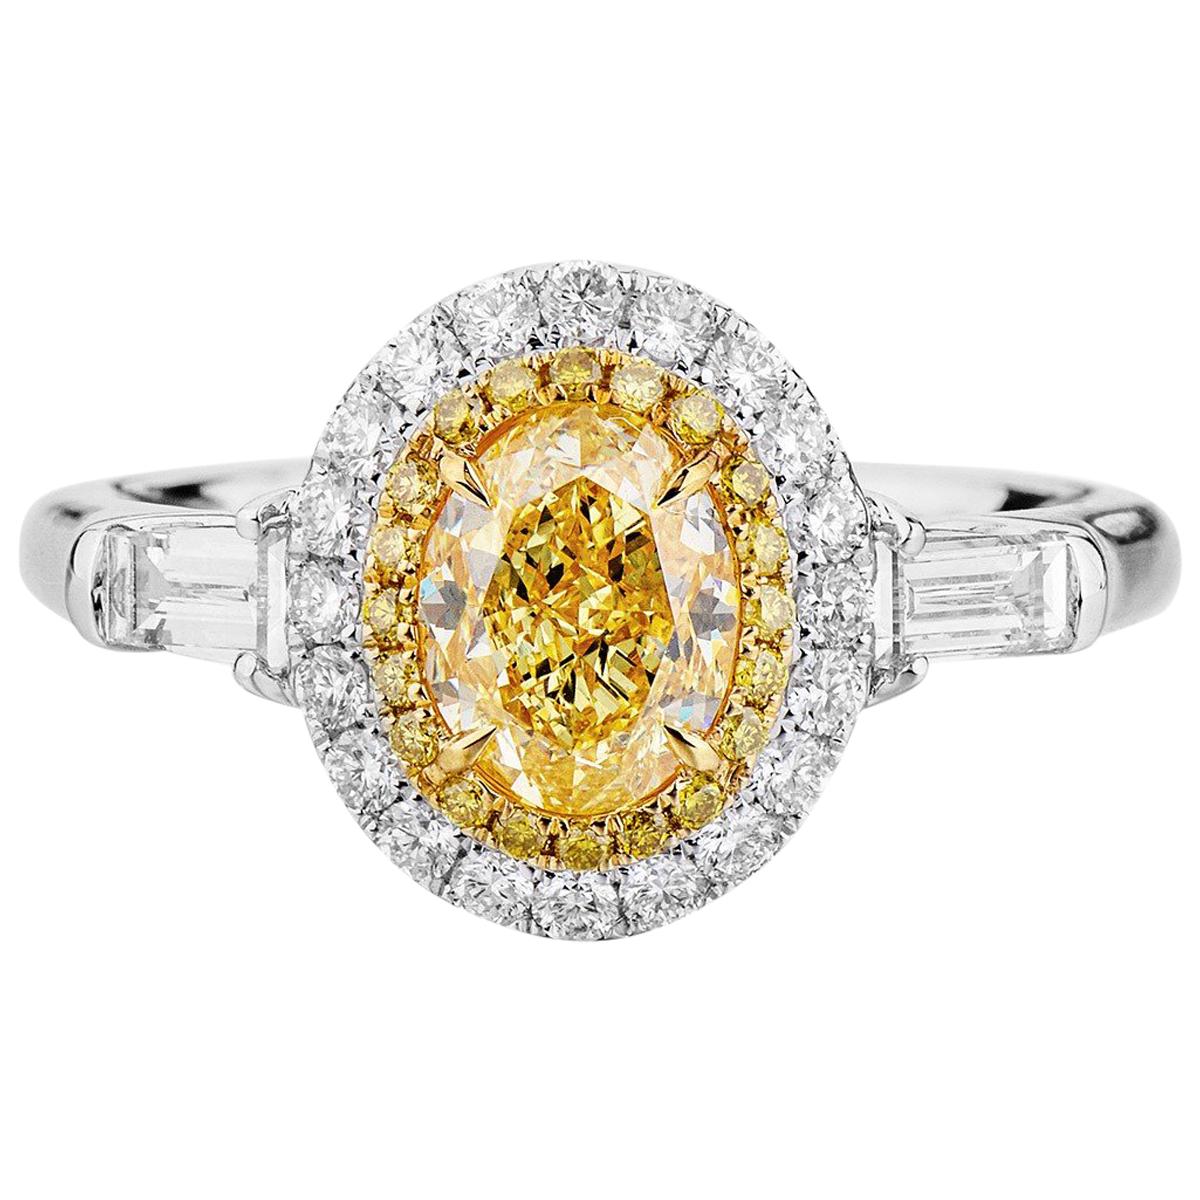 GIA Certified White Gold Oval Fancy Yellow Halo Diamond Ring, 1.71 Carat